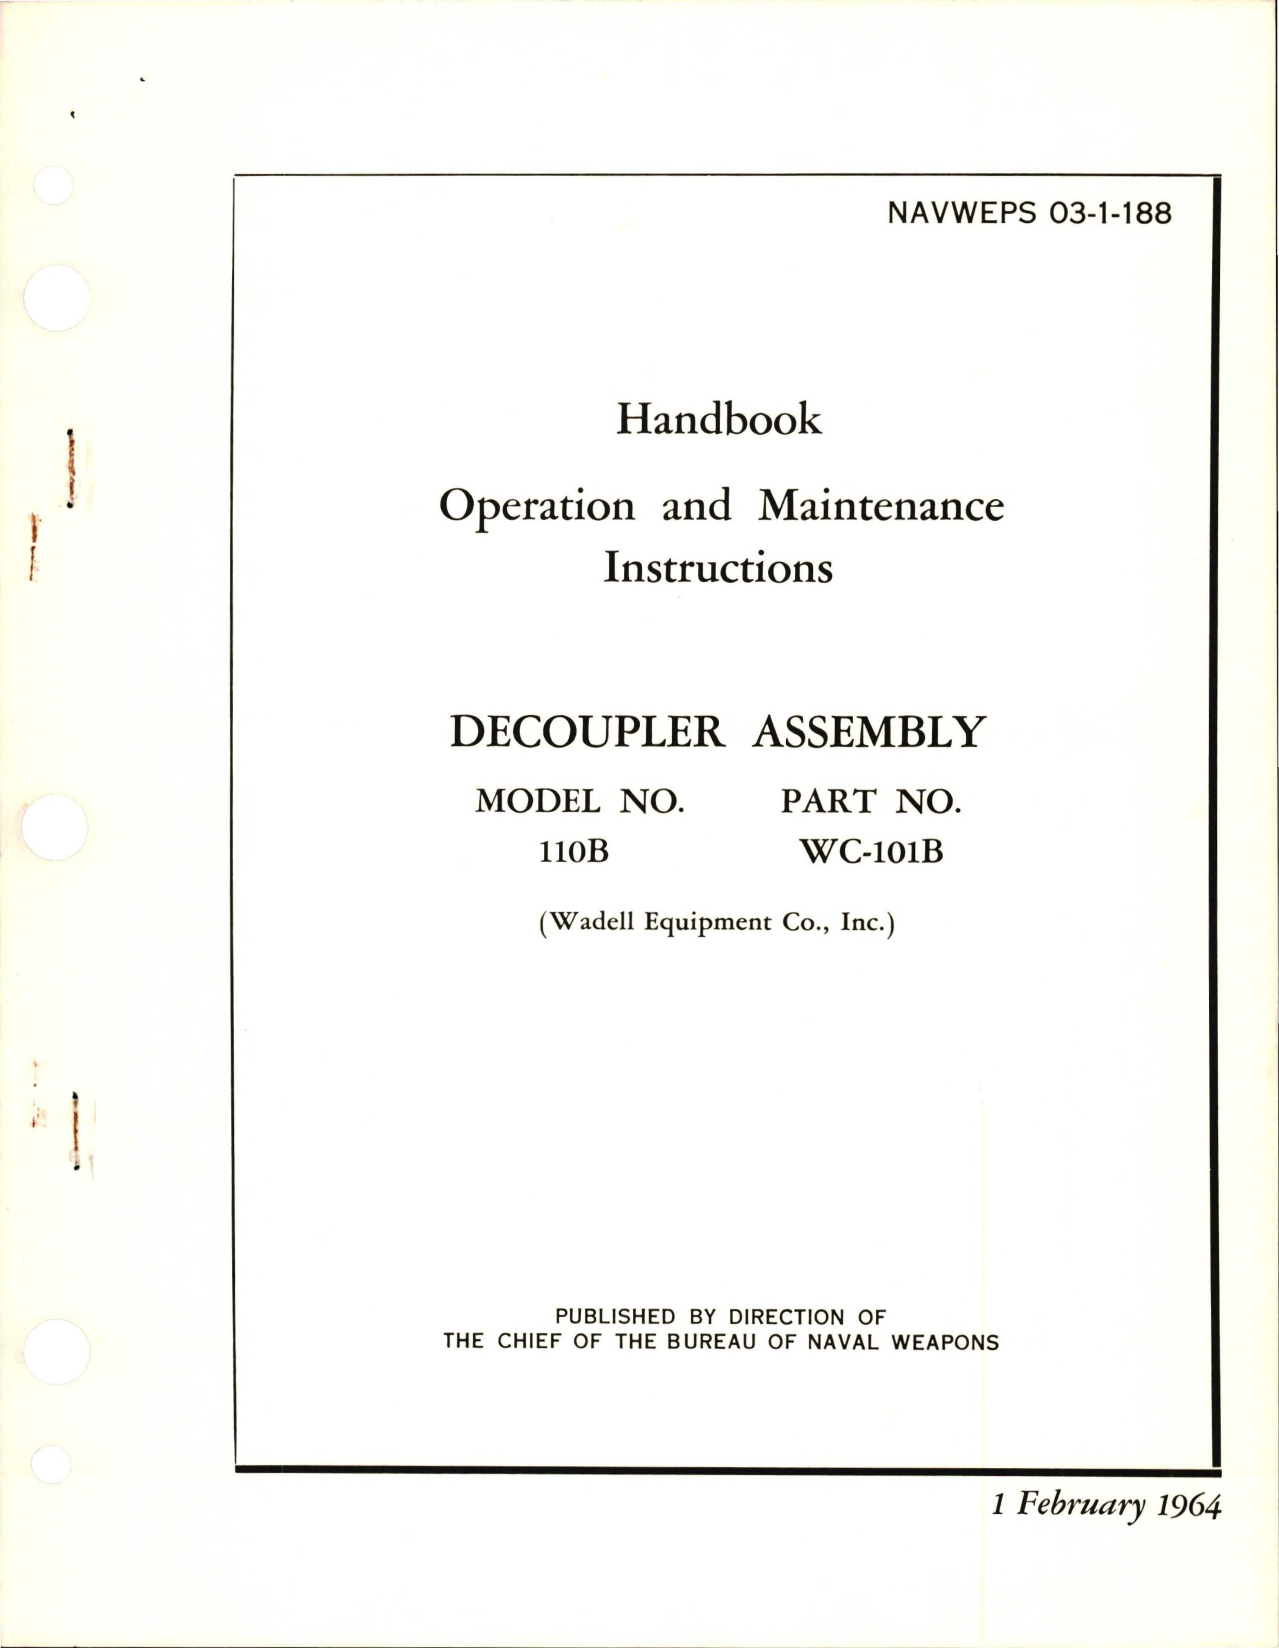 Sample page 1 from AirCorps Library document: Operation and Maintenance Instructions for Decoupler Assembly - Model 110B - Part WC-101B